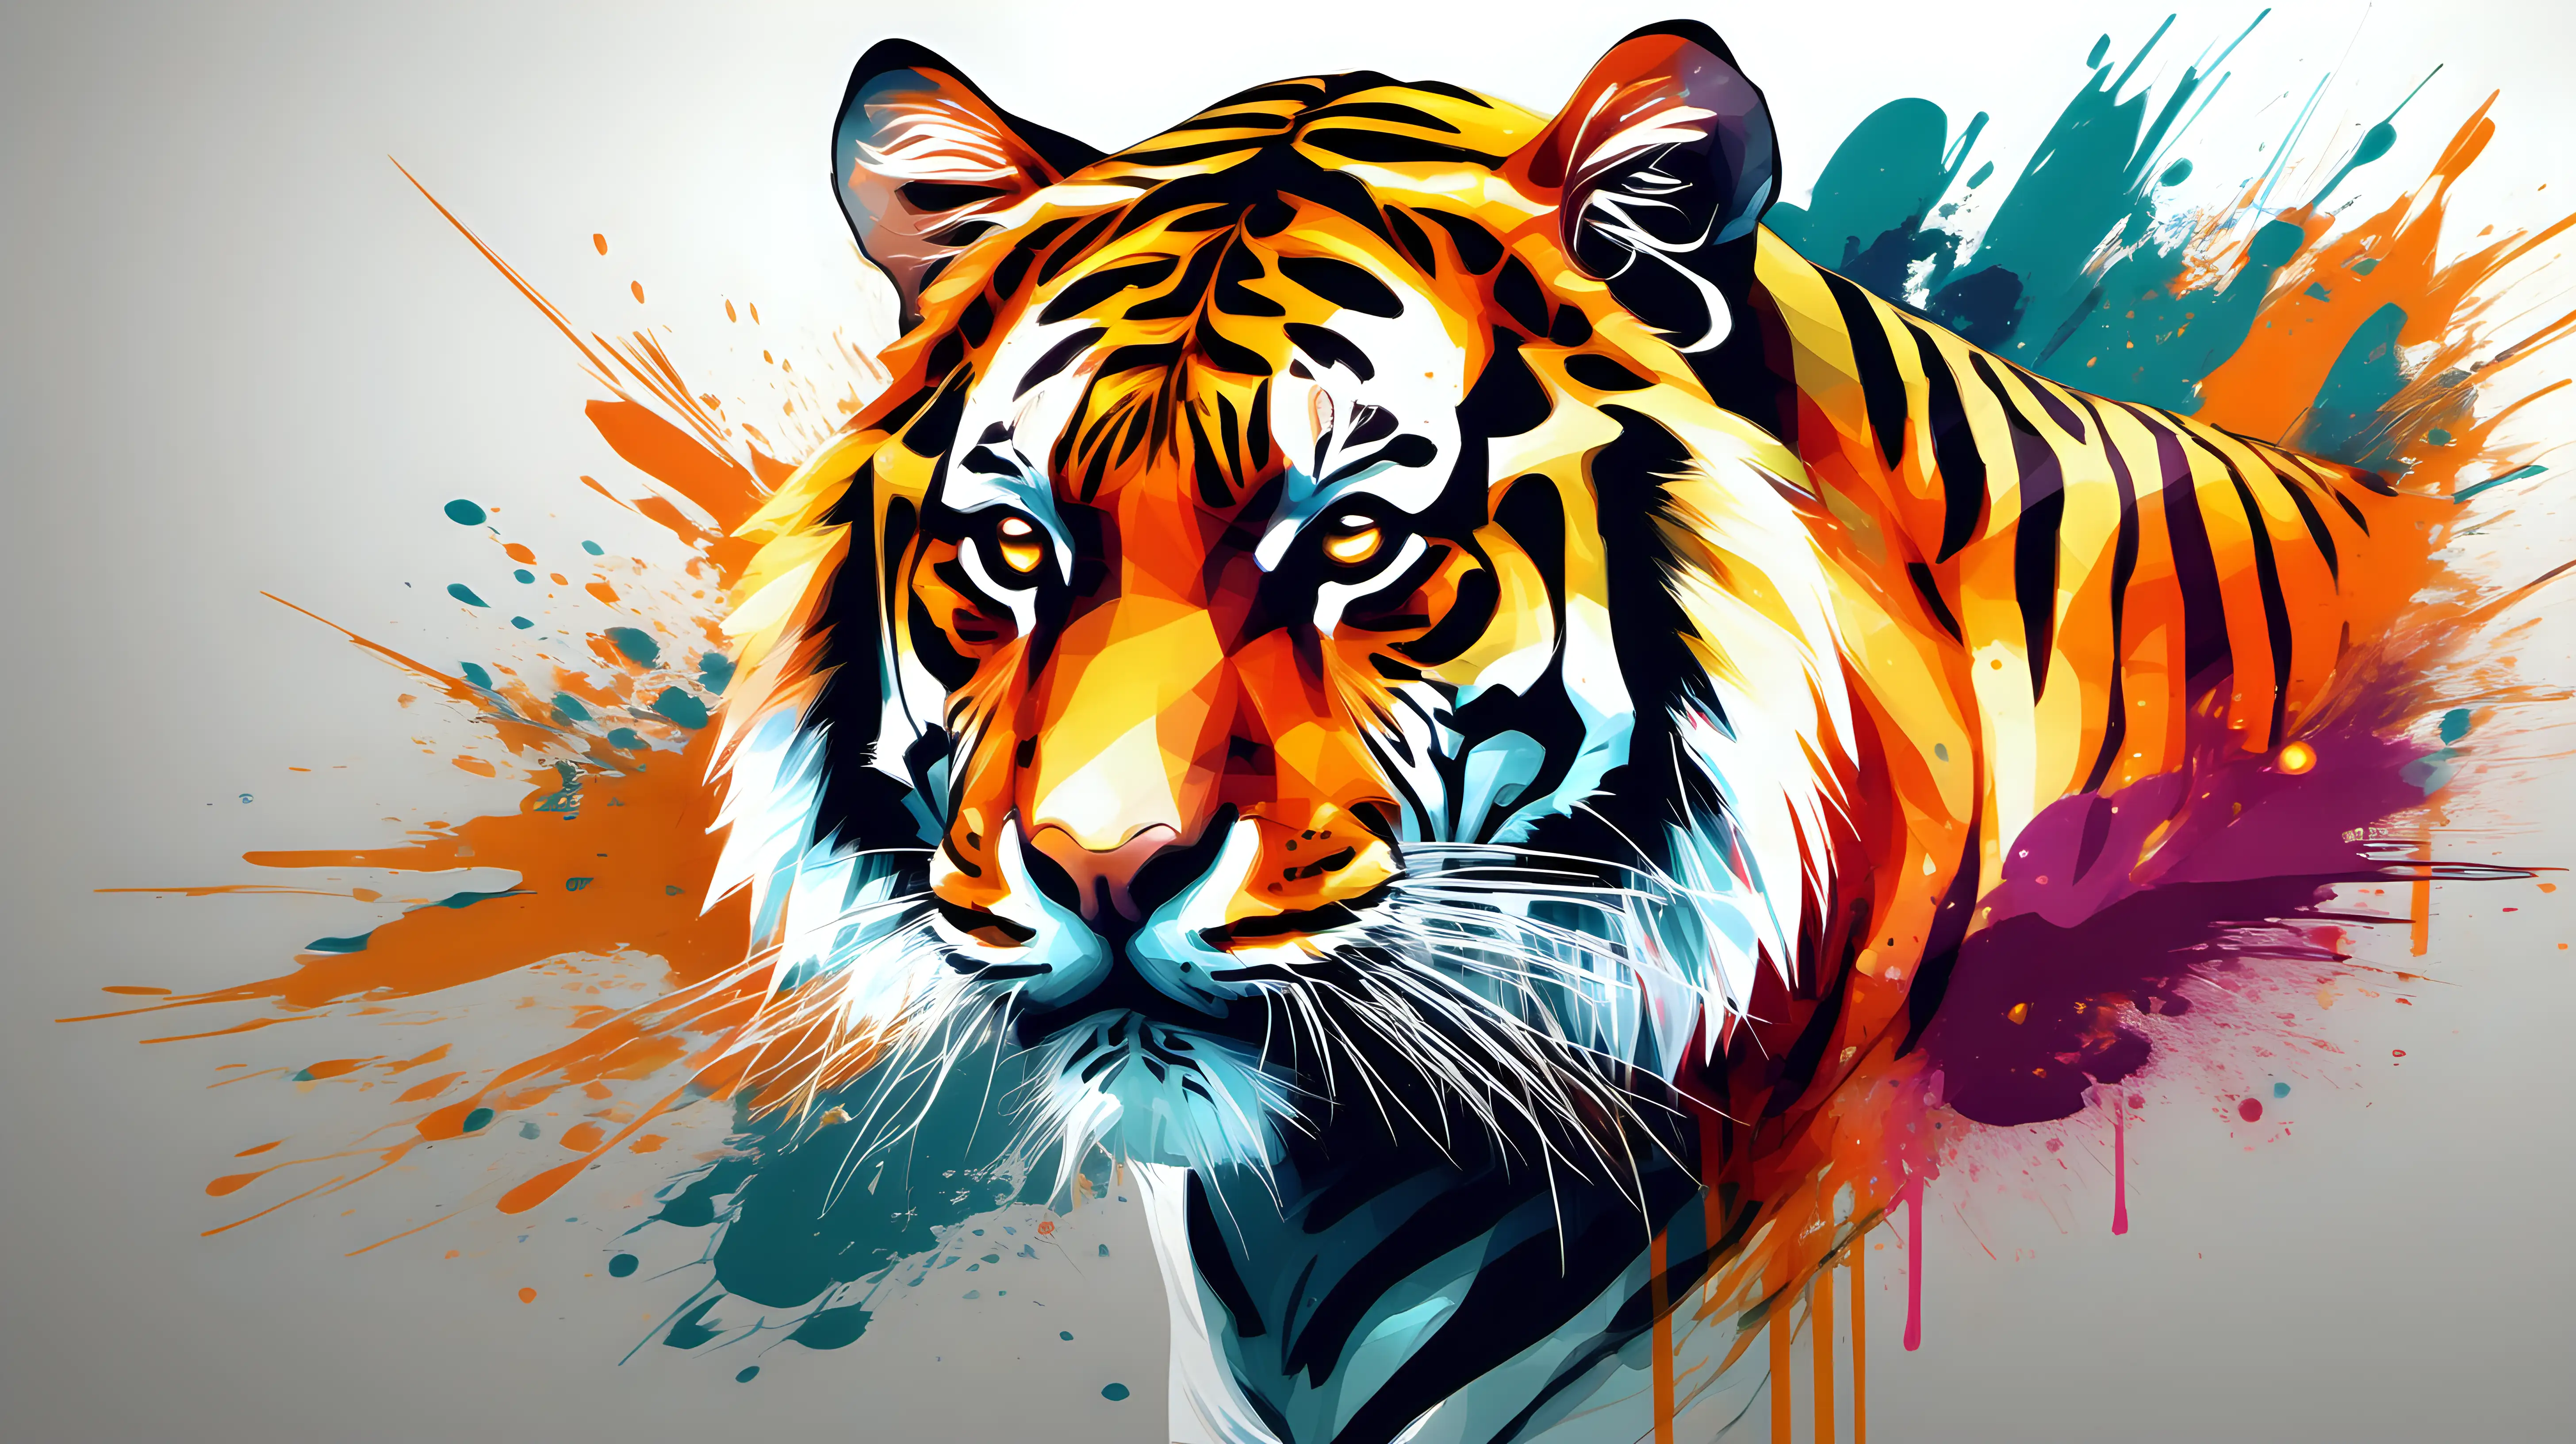 Illustrate a tiger in a painterly style, with vibrant and abstract brushstrokes creating a visually stunning representation of this majestic creature